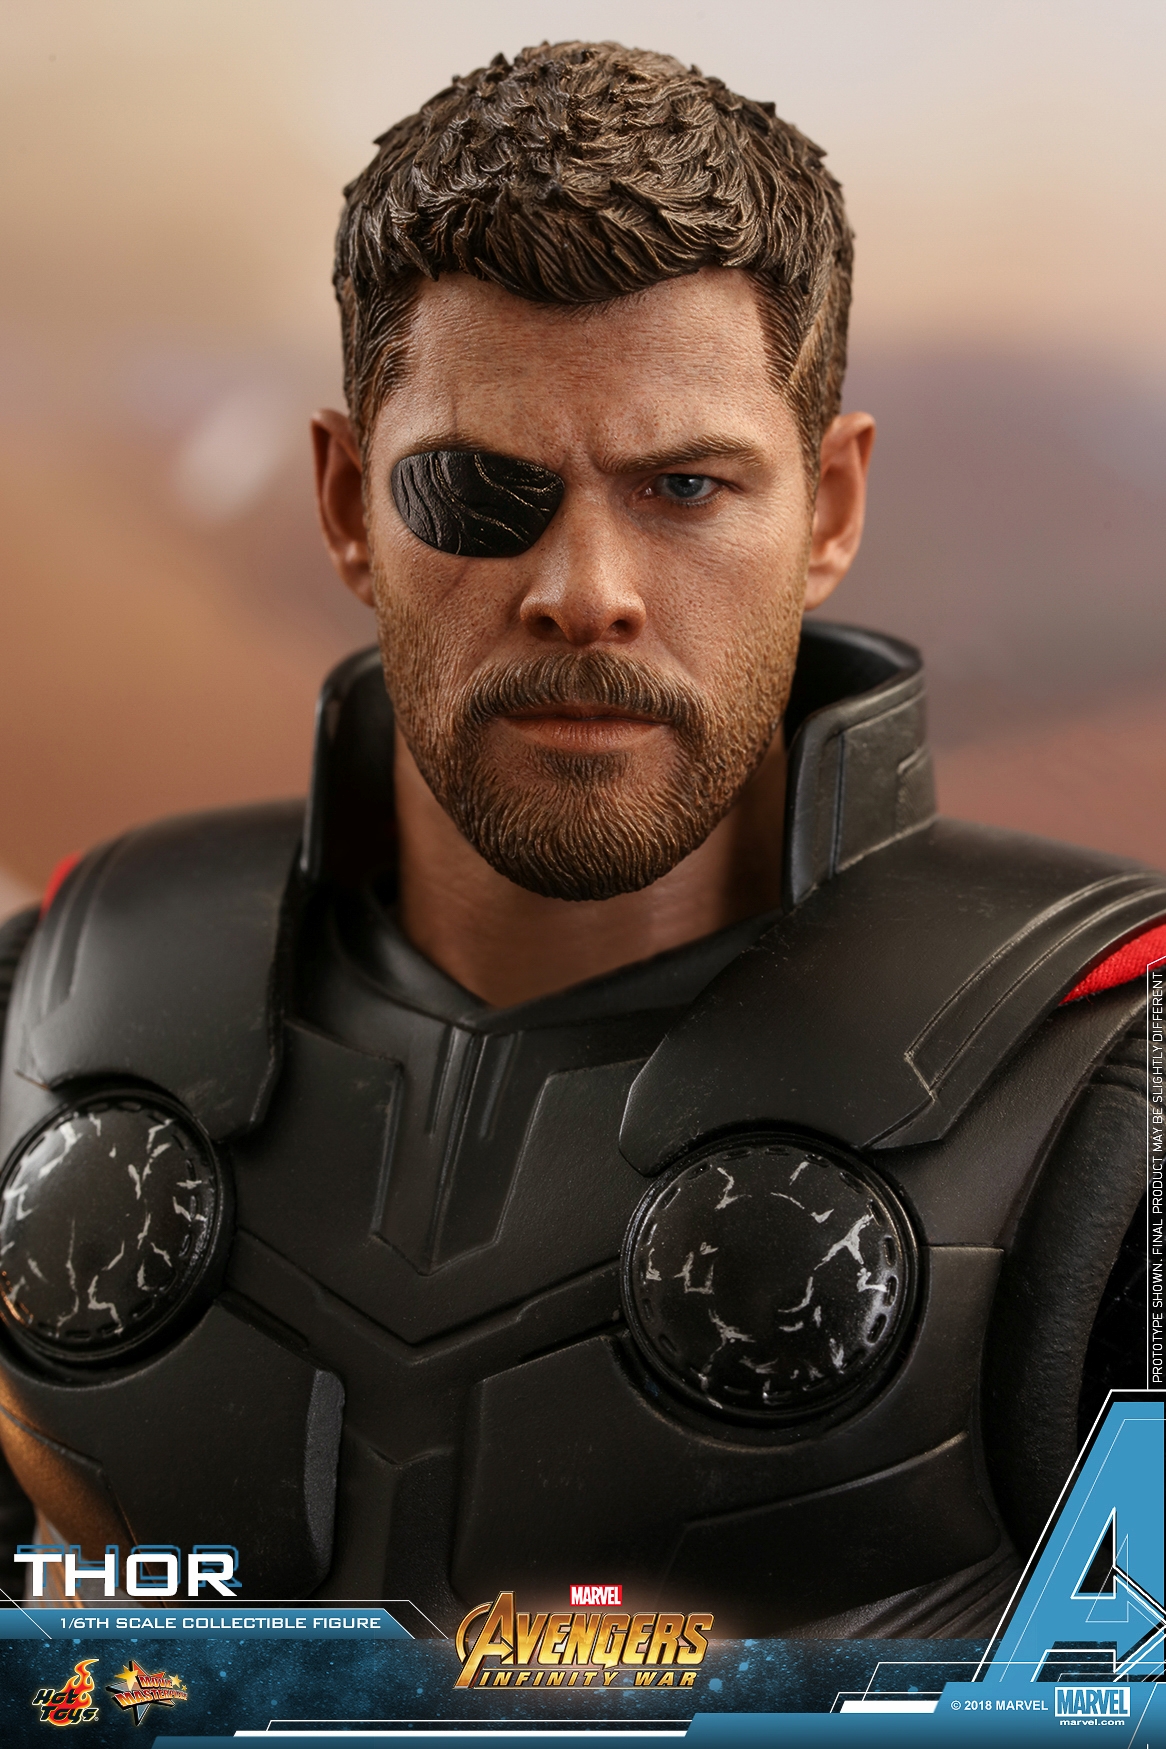 Hot-Toys-MMS474-Avengers-Infinity-War-Thor-Collectible-Figure-015.jpg